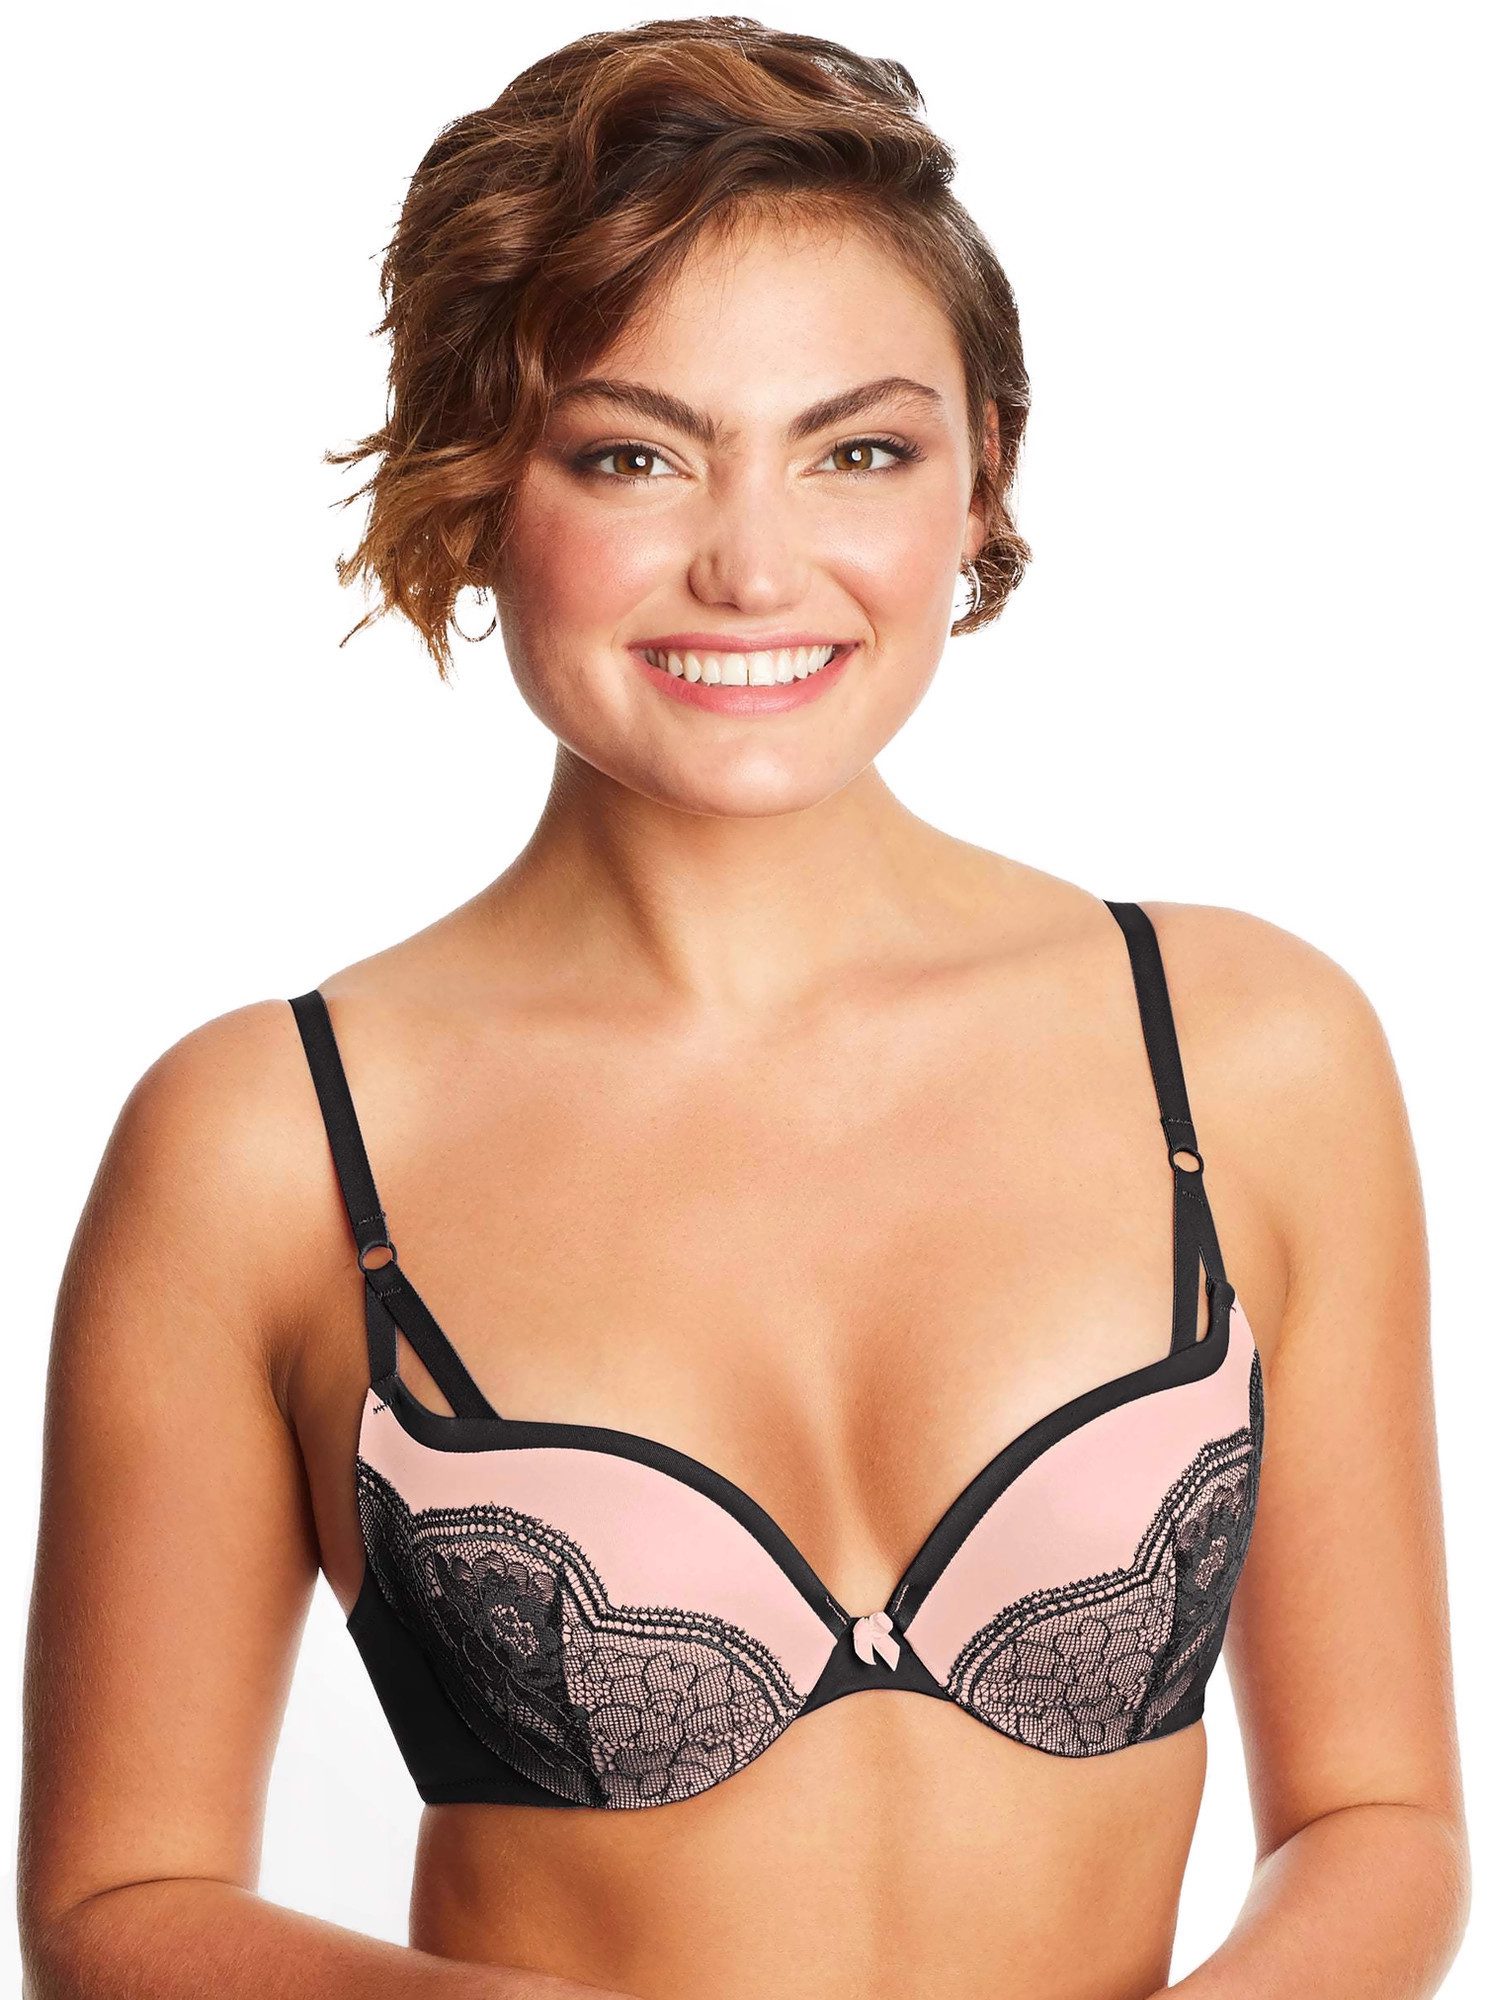 Buy Maidenform Women's Love The Lift Push Up, Black Body/Beige Lace, 32B at